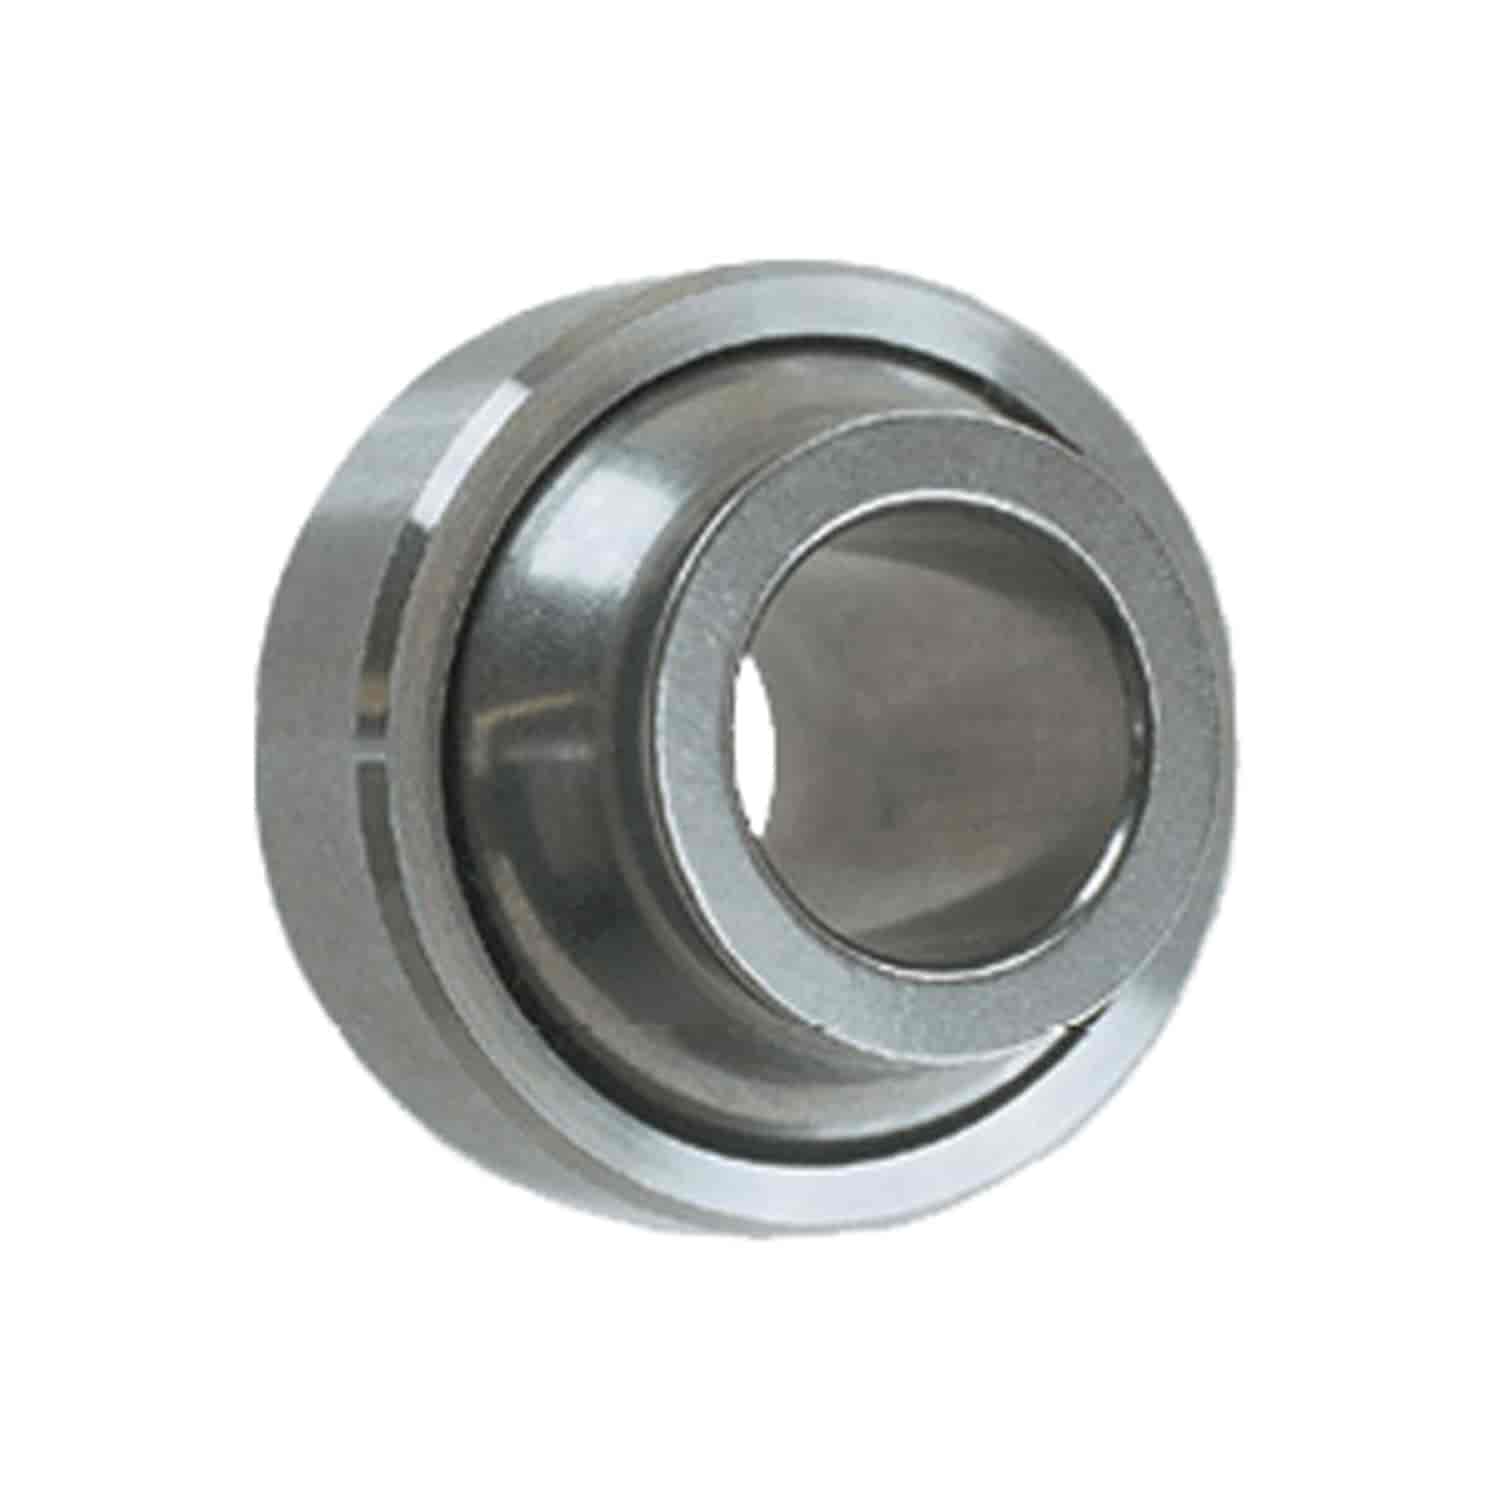 High Misalignment 440C SS Shperical Bearing Hole Size: 0.3125"